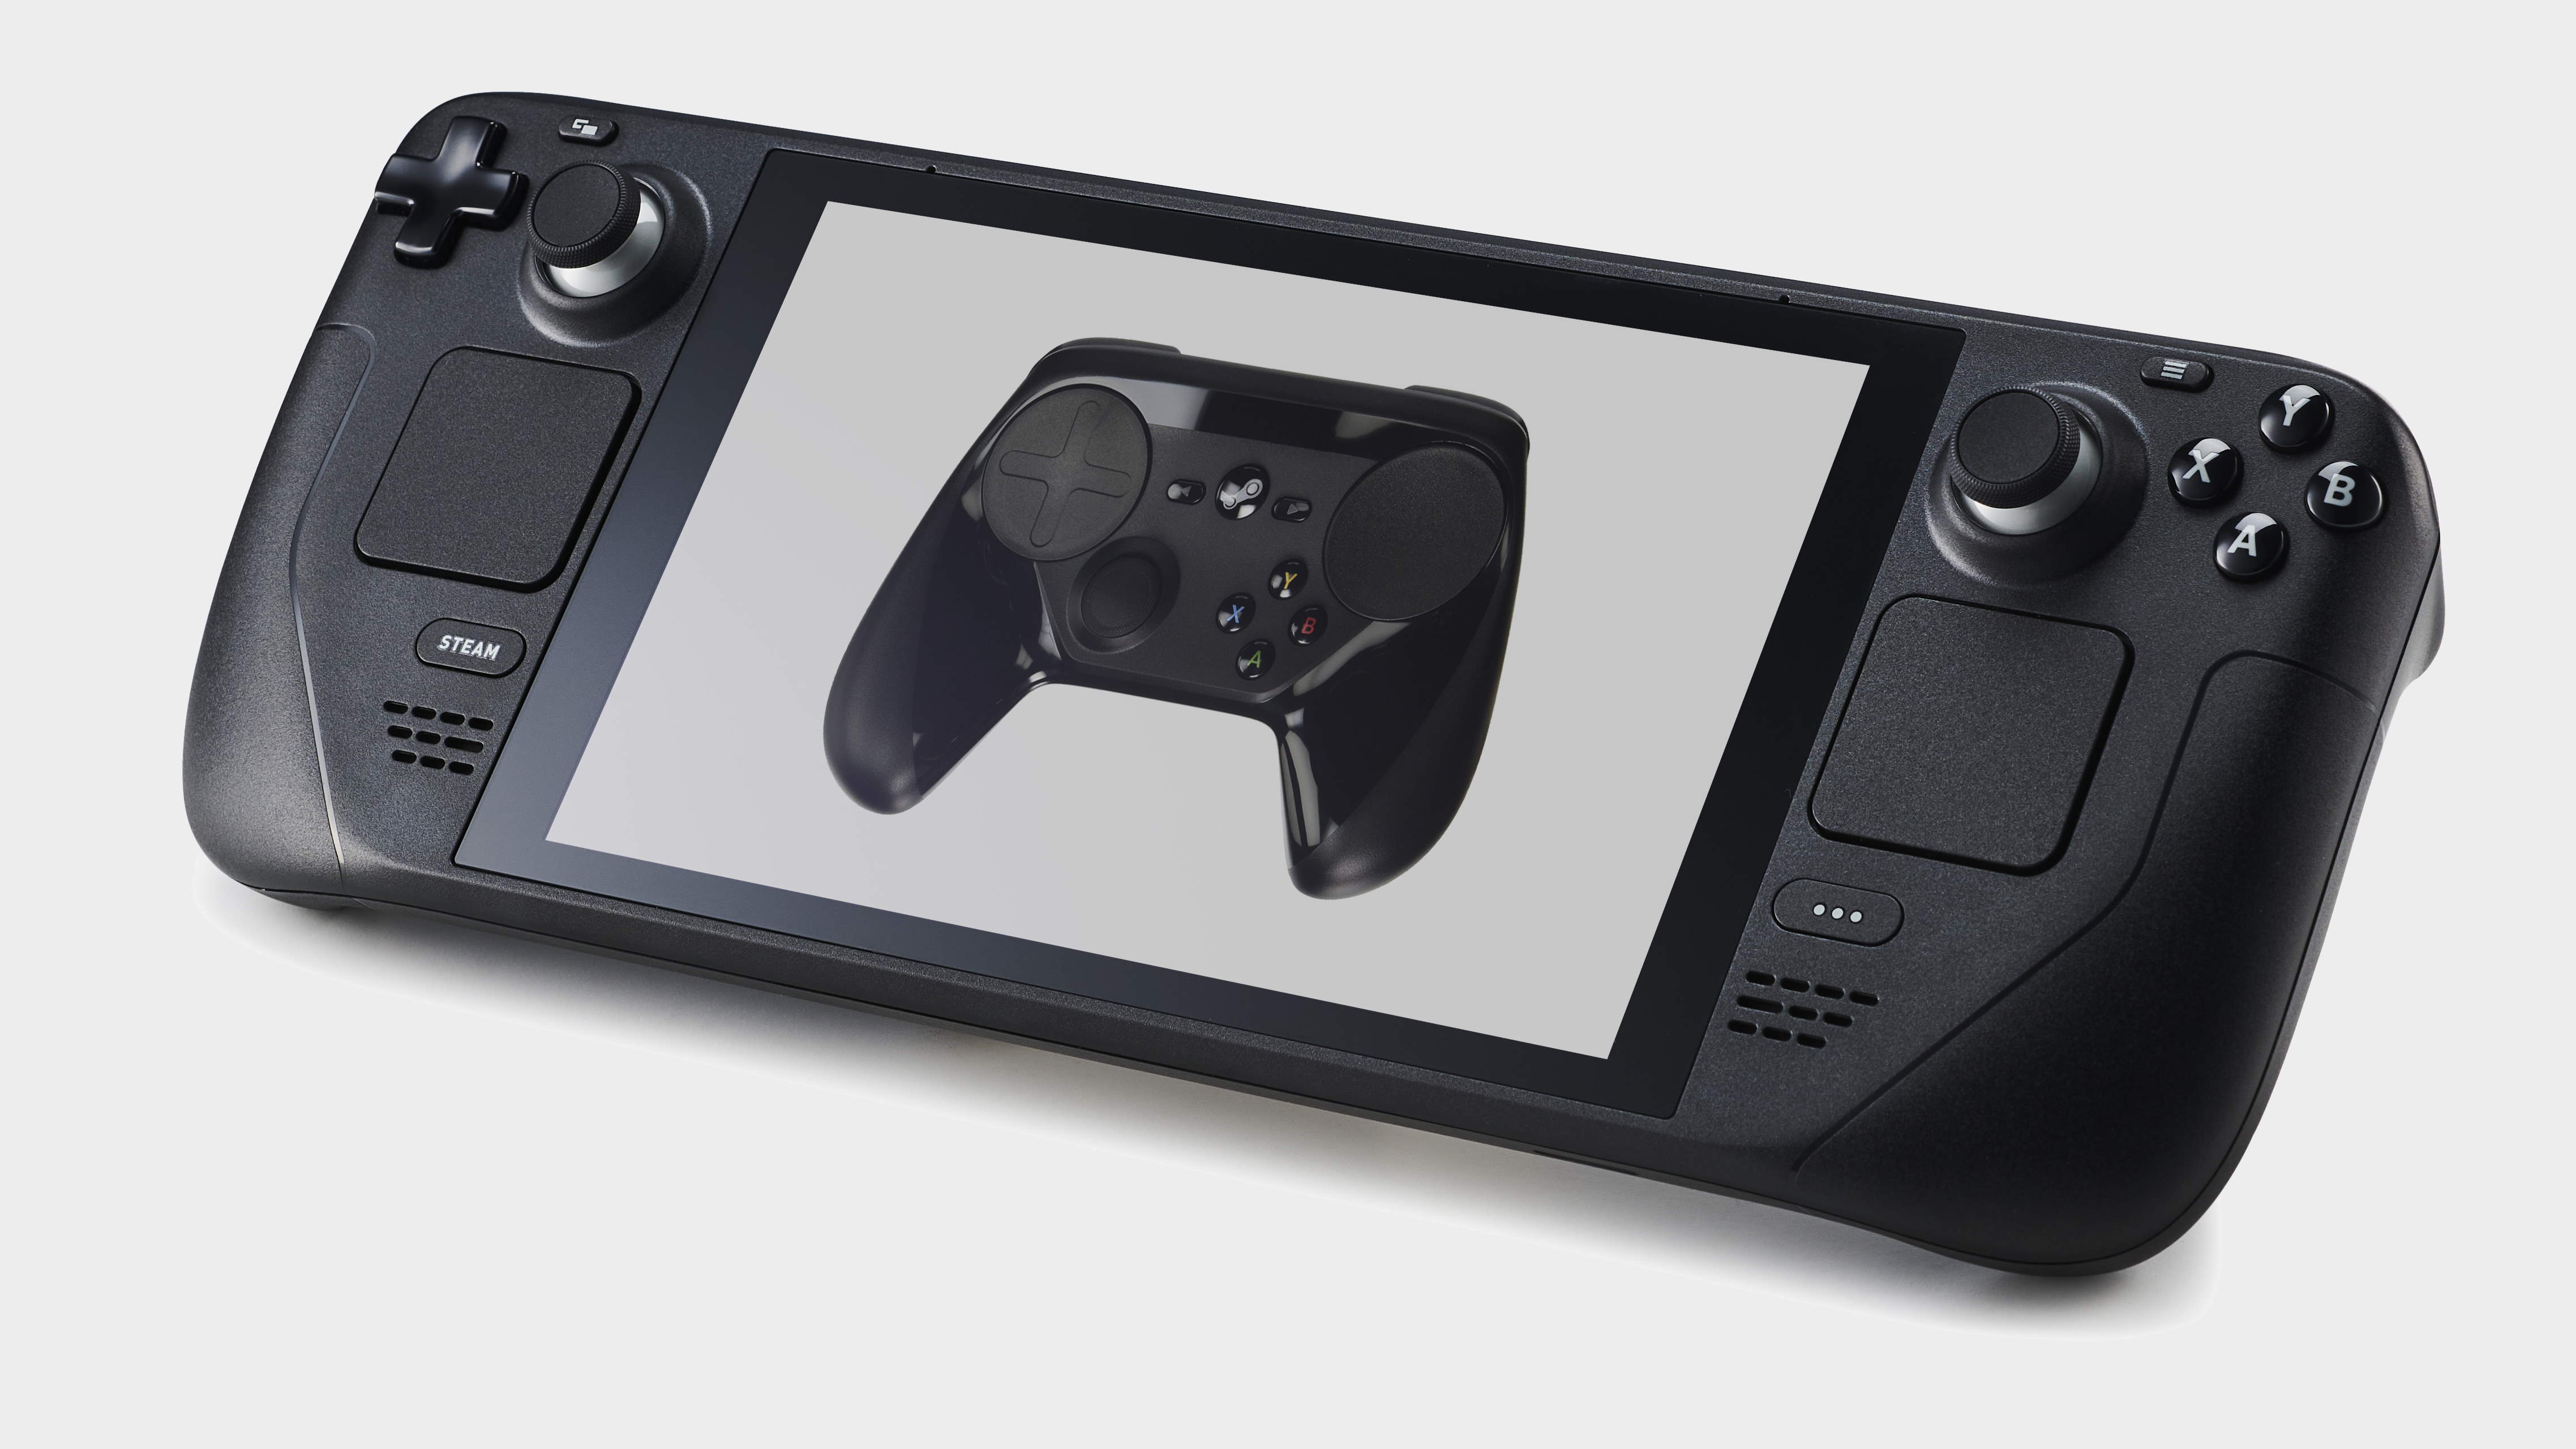 Steam Controller image on the screen of a Steam Deck